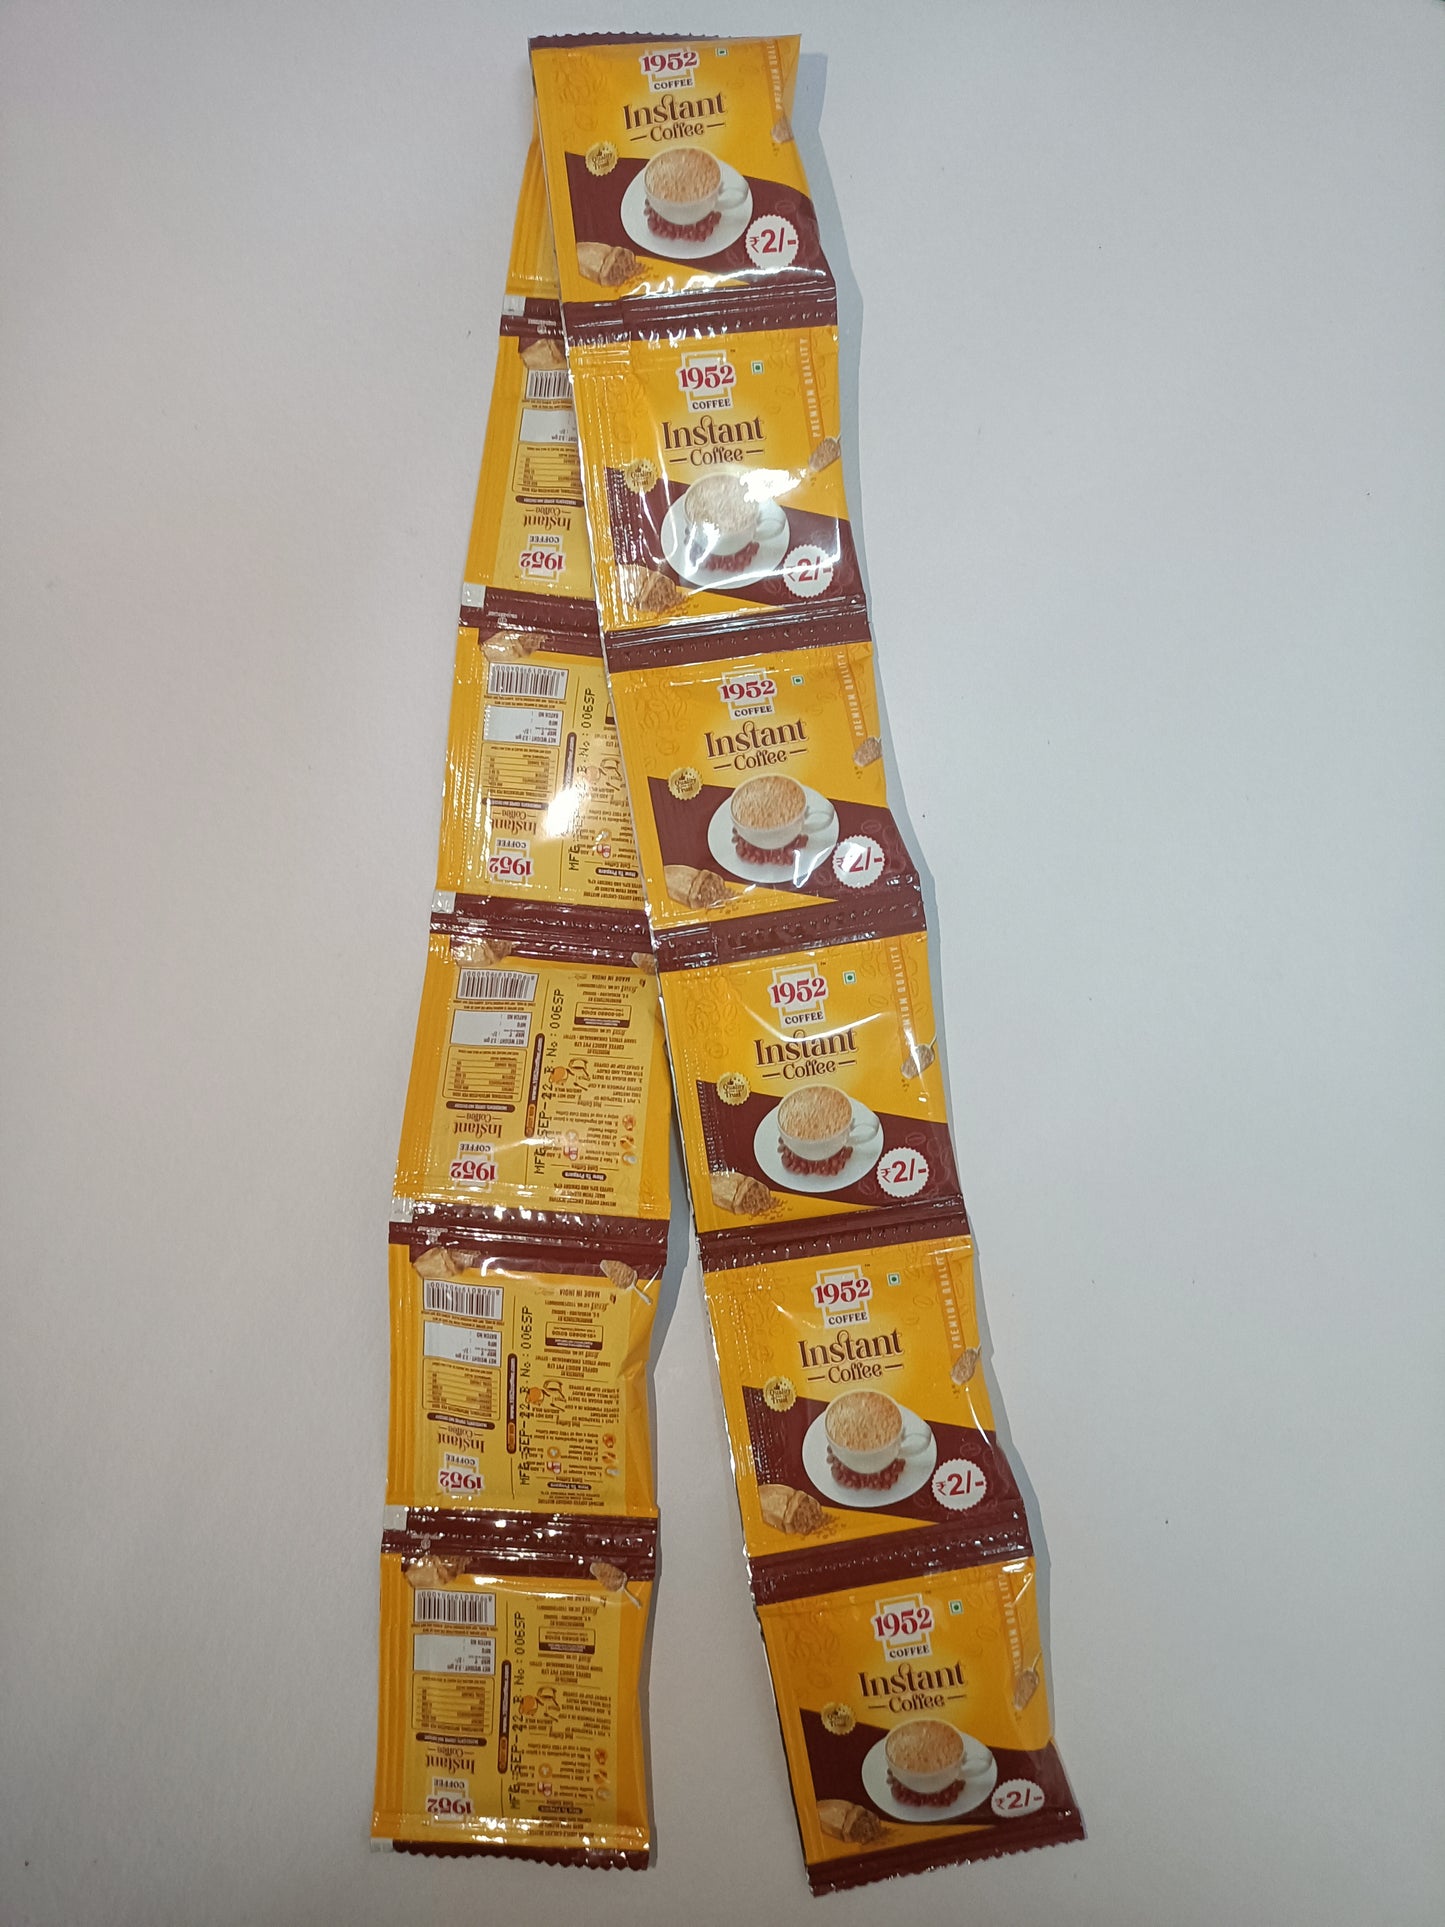 Instant Coffee 53/47 (2rs x 144nos)